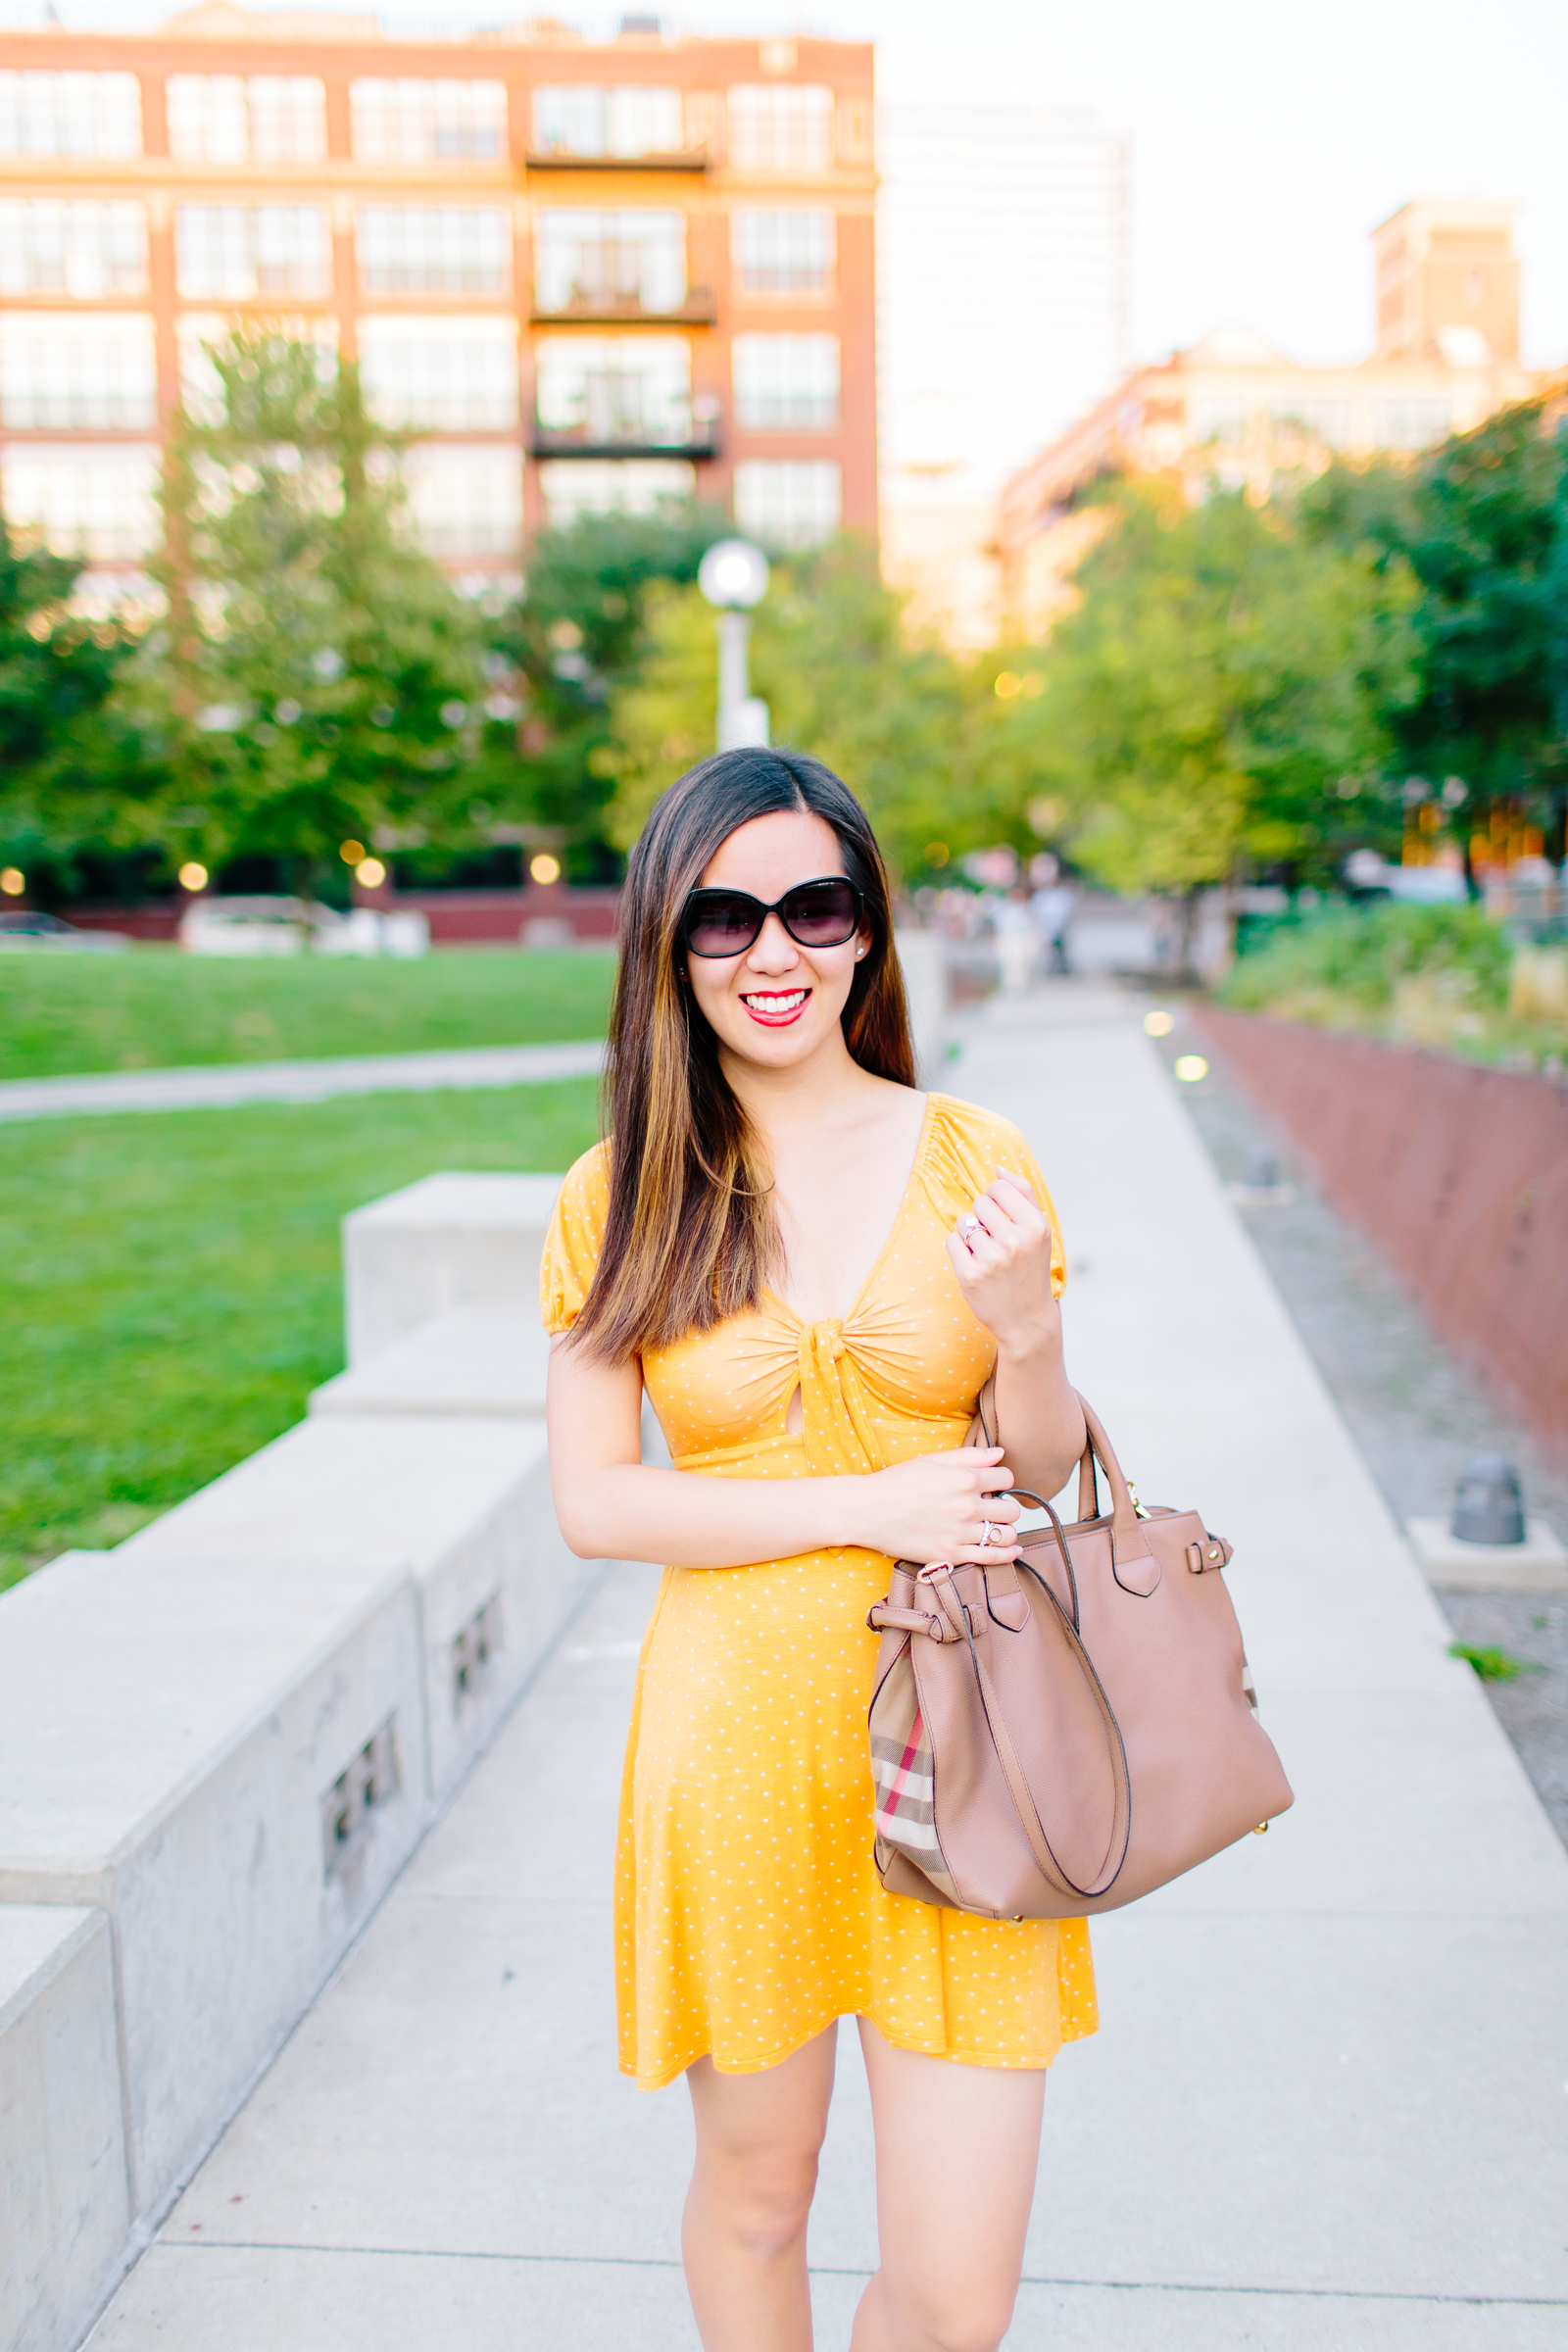 Recent Updates, Weekend Plans, and a Dress for Fall - Tia Perciballi